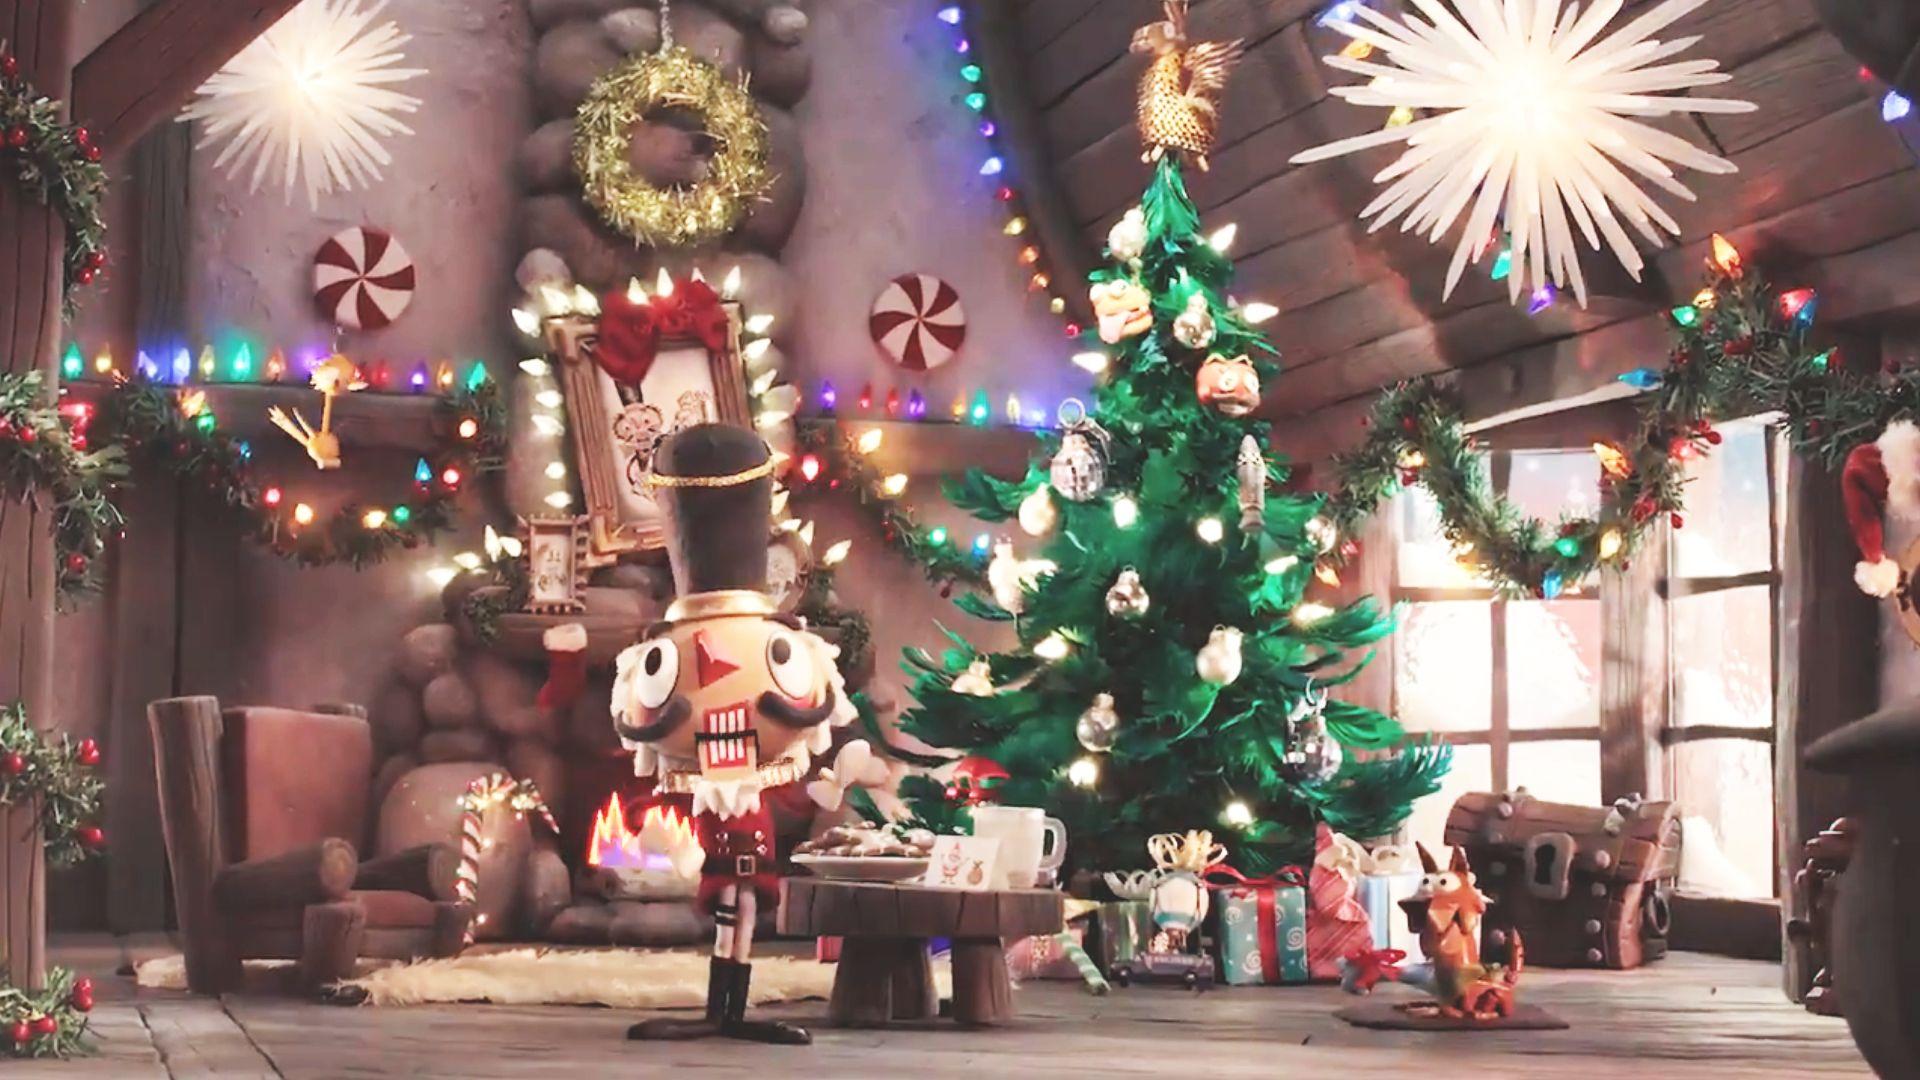 Crackshot Features In Fortnite's Adorable Christmas Themed Trailer